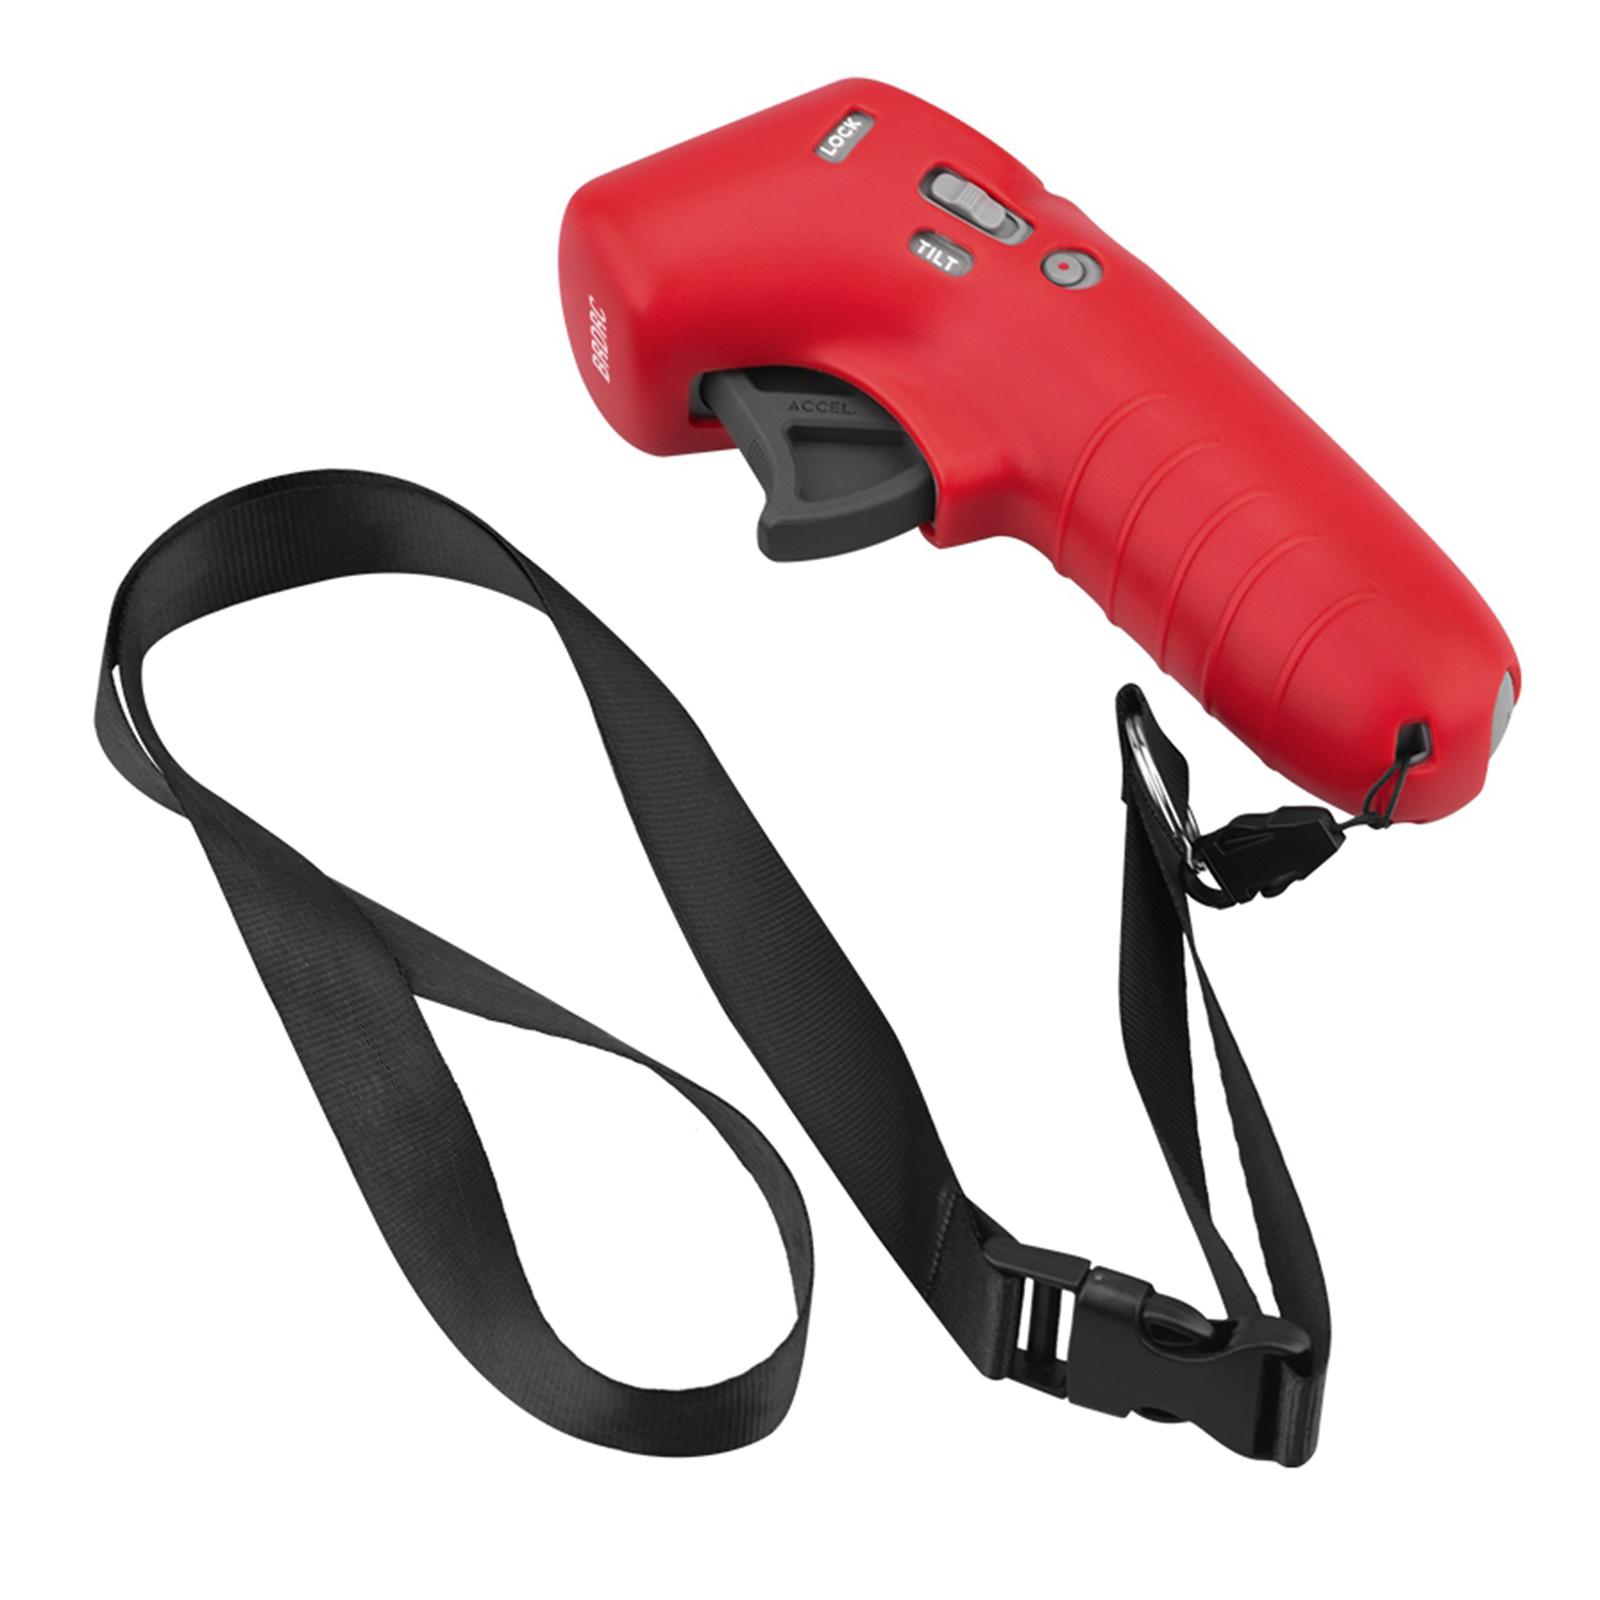 Silicone Protective Cover for DJI FPV Combo Motion Controller Skin Case Protector with Anti-Lost Lanyard Accessories